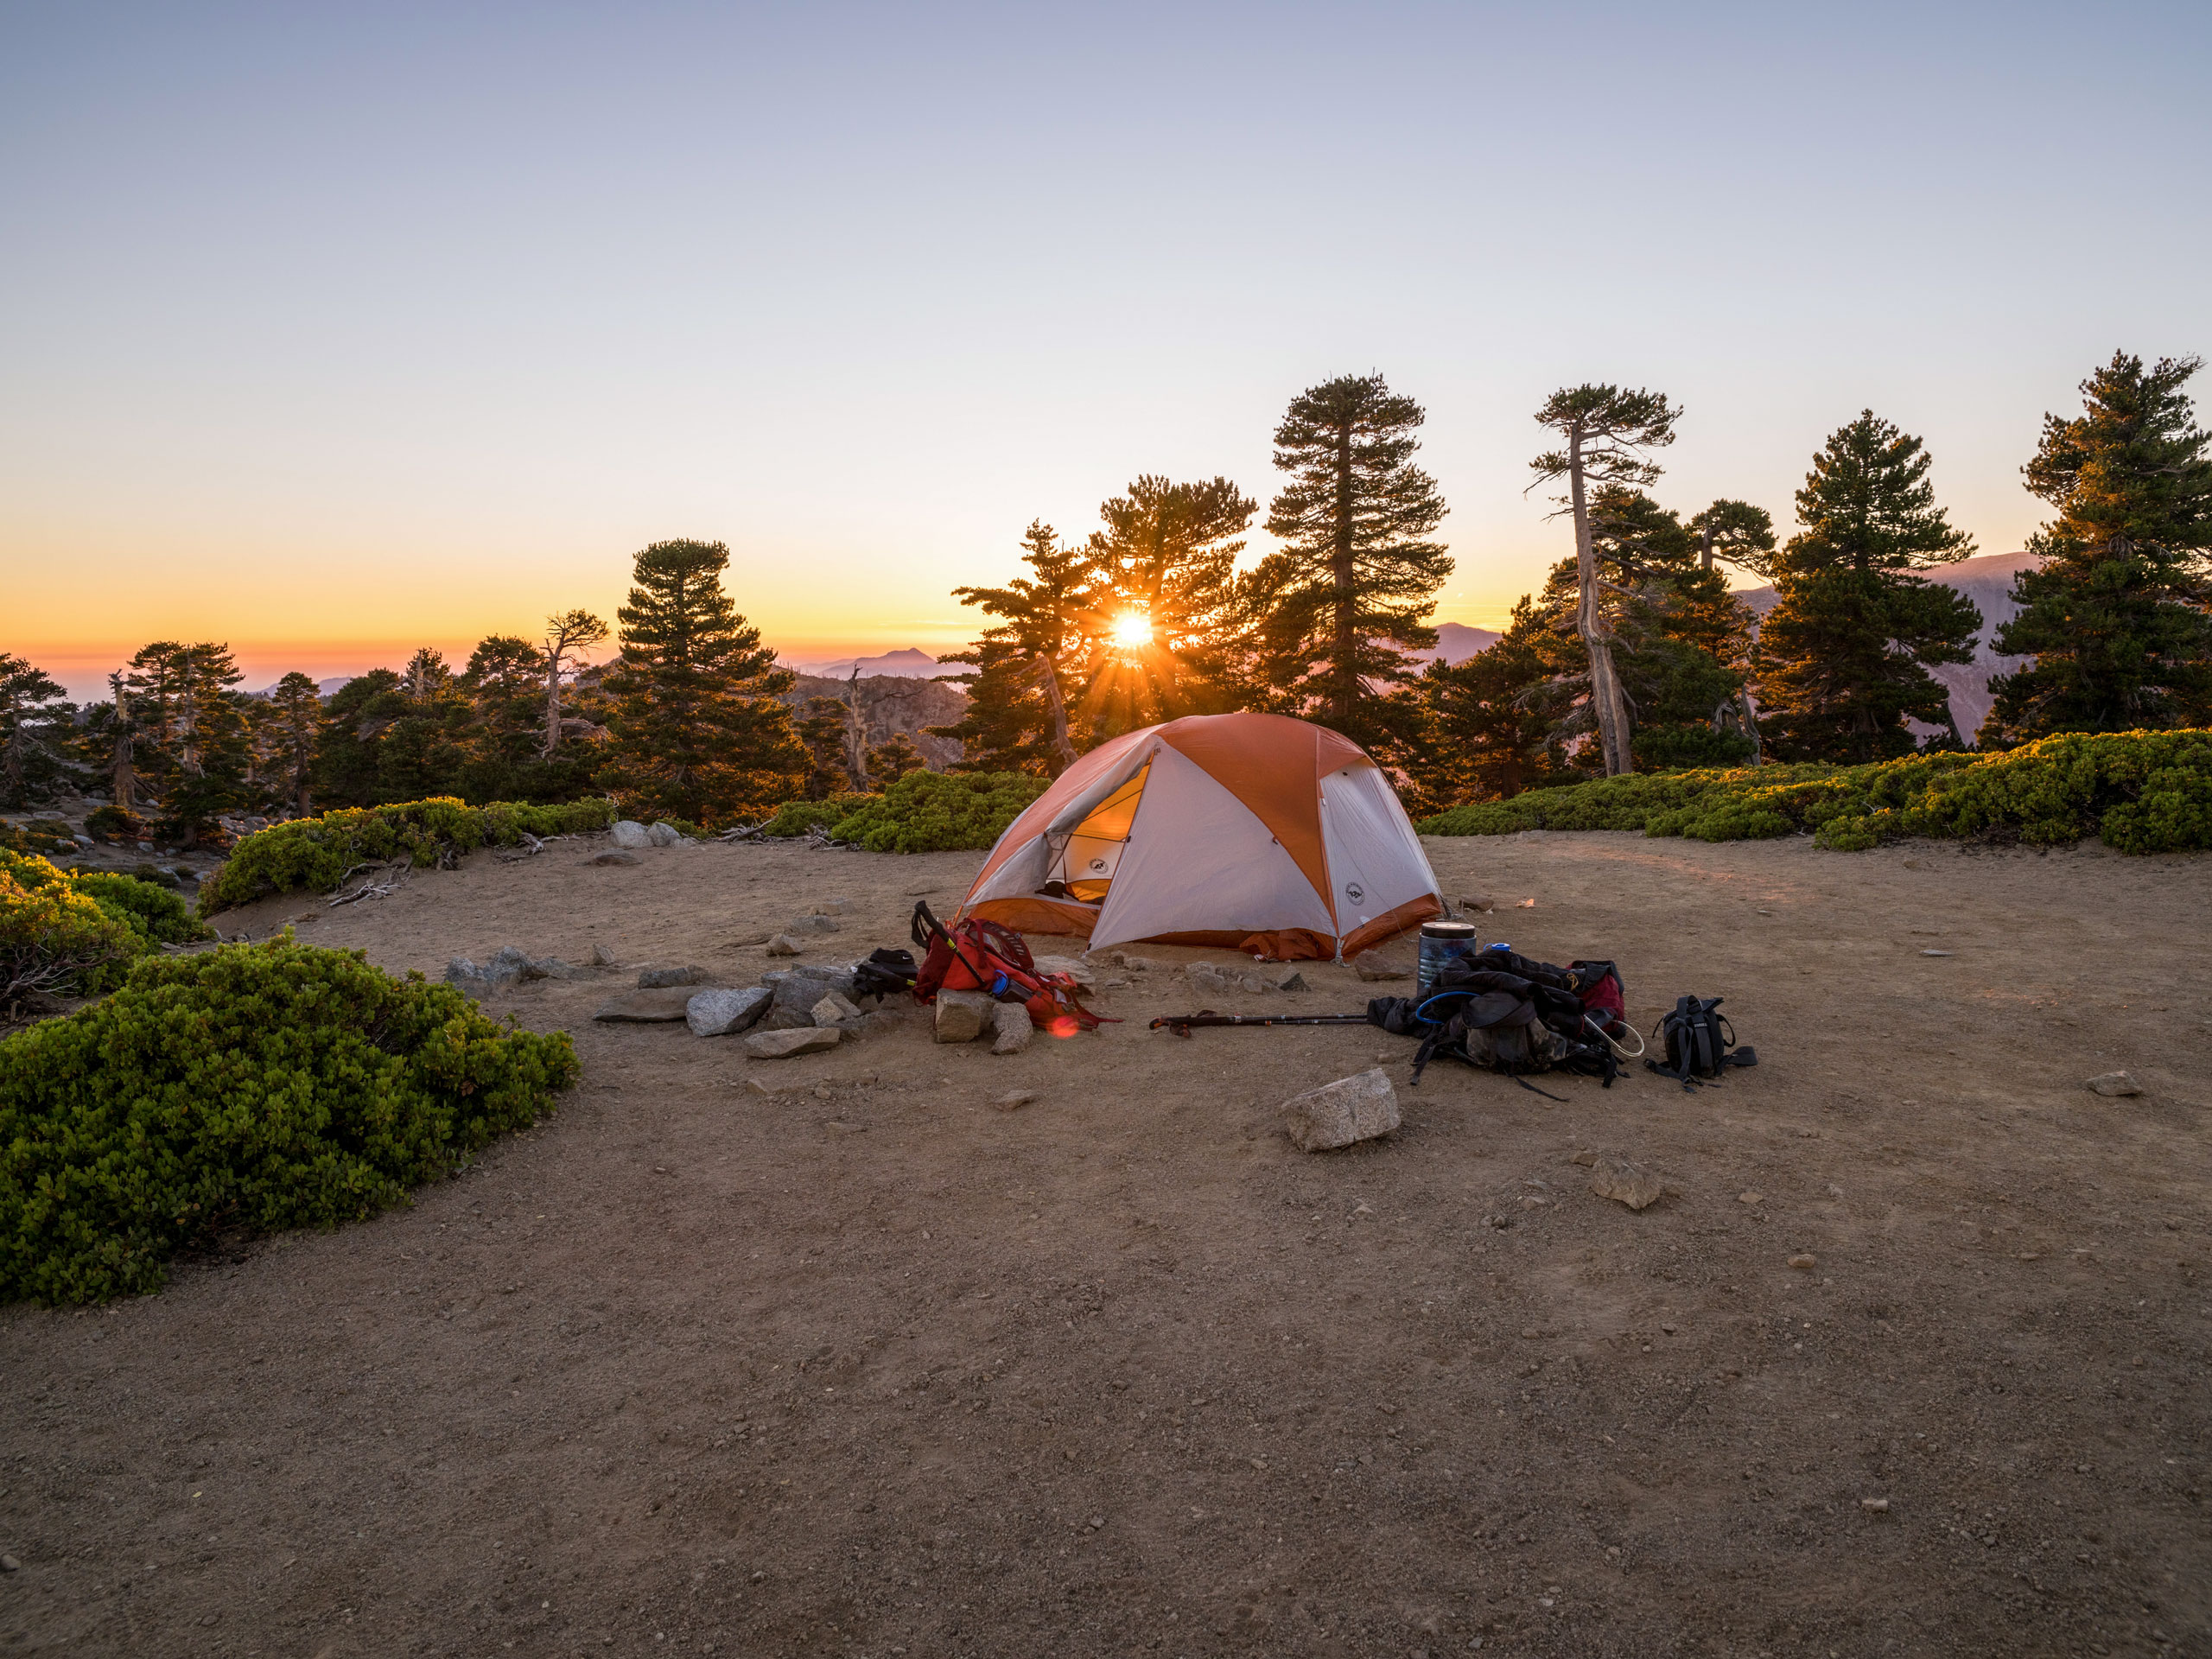 Sunrise sunset camping gear tent on mountain top lookout